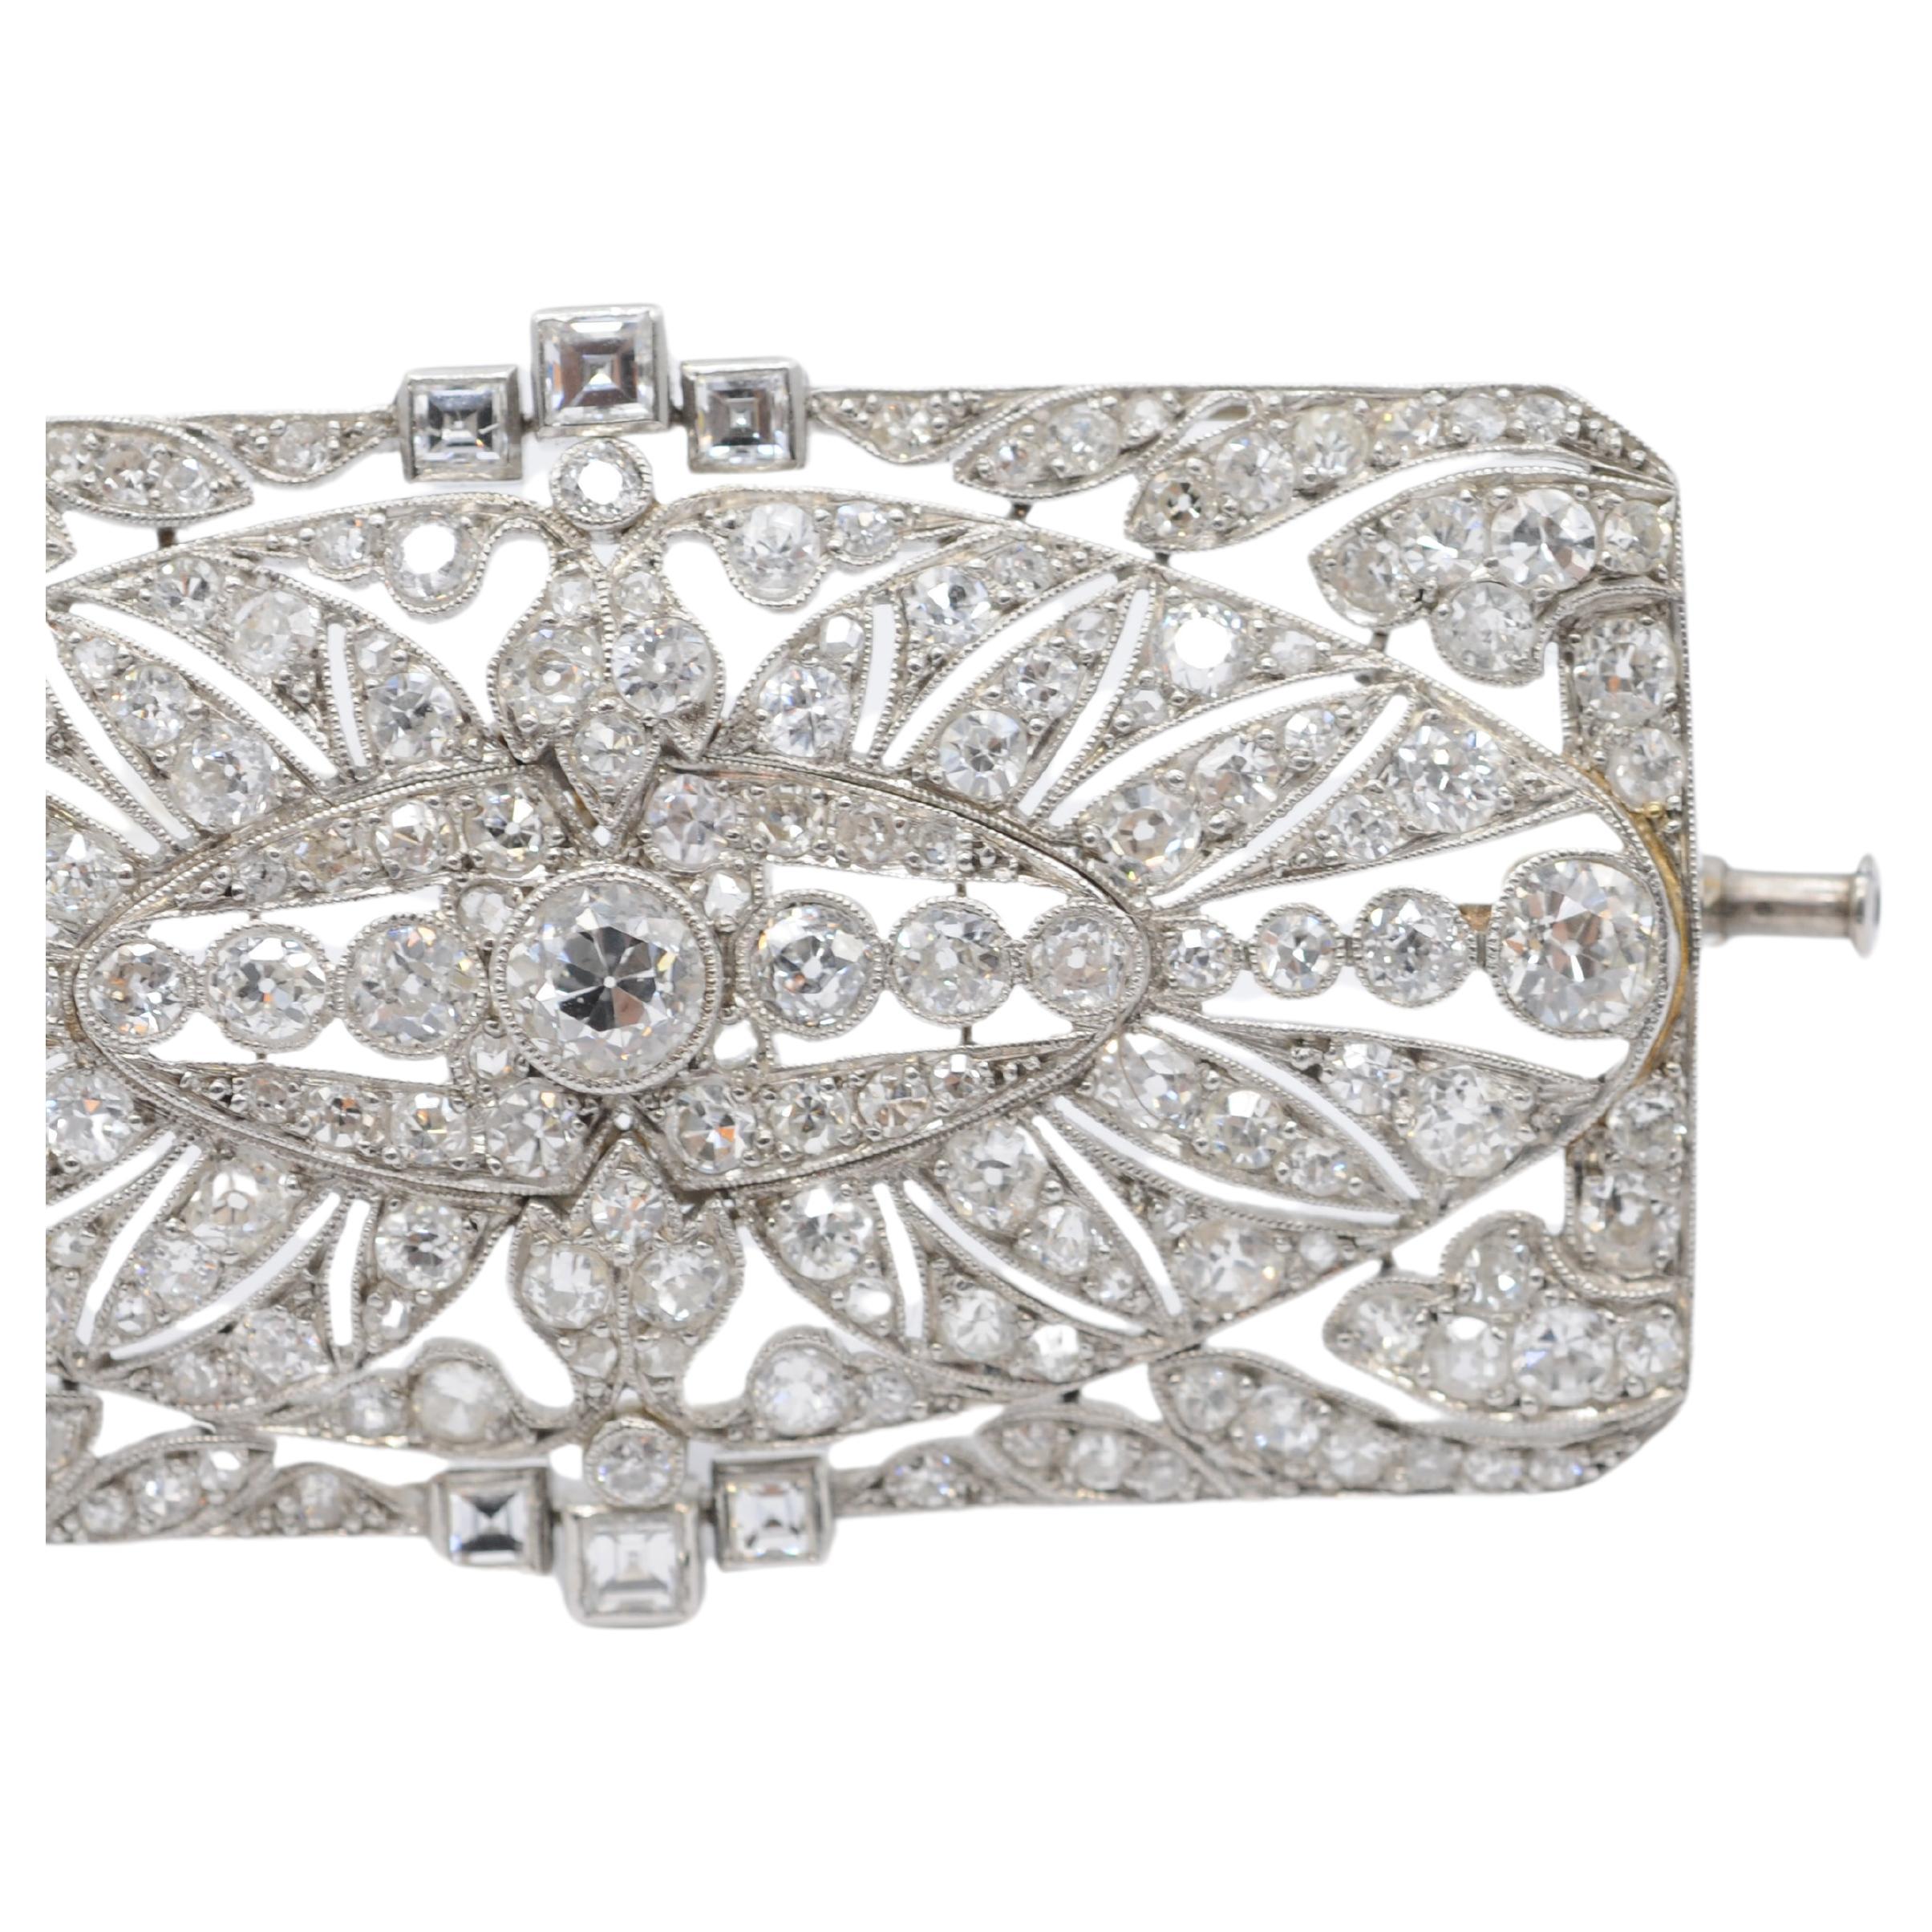 Art deco brooch with 170 diamonds in Old European cut noble platinum  For Sale 7